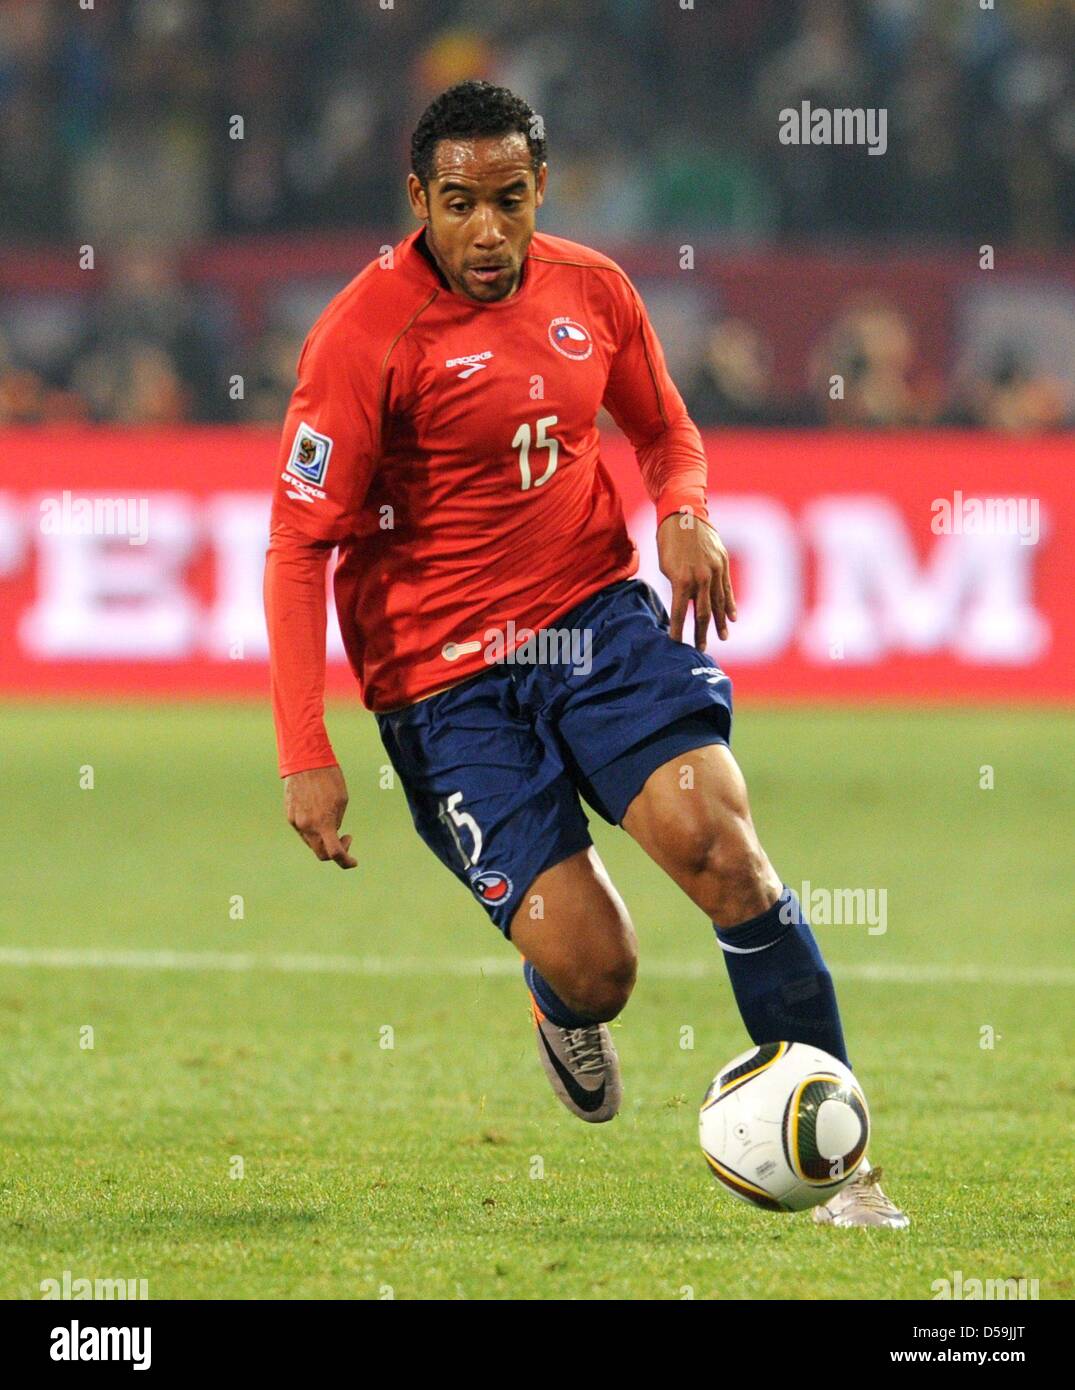 Jean Beausejour of Chile controls the ball during the FIFA World Cup 2010 group H match between Chile and Spain at the Loftus Versfeld Stadium in Pretoria, South Africa 25 June 2010. Photo: Bernd Weissbrod dpa - Please refer to http://dpaq.de/FIFA-WM2010-TC Stock Photo